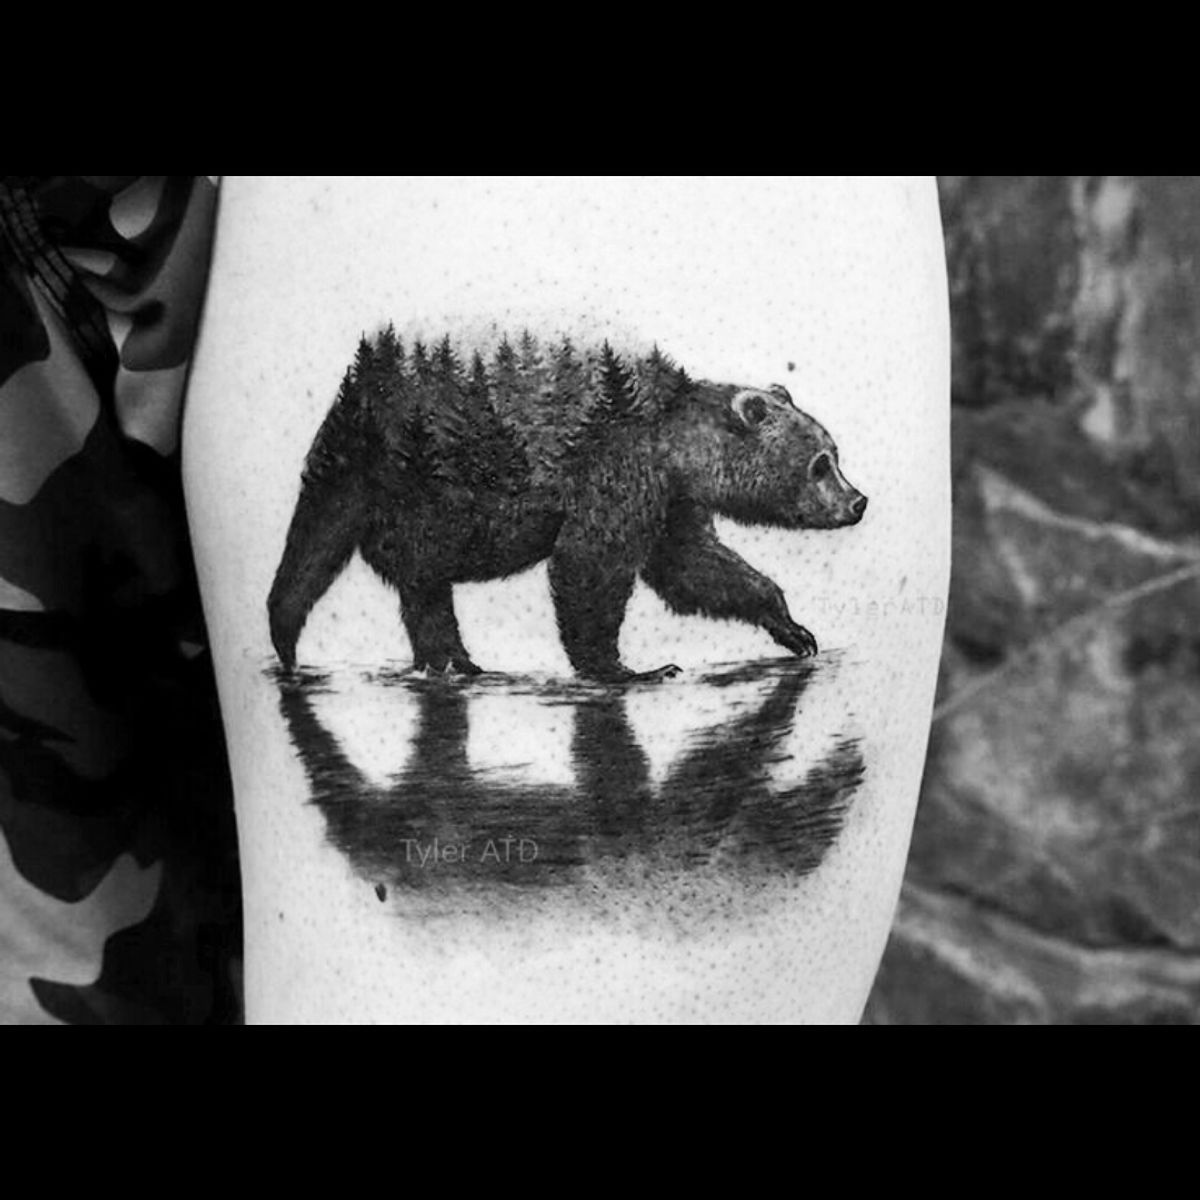 Tattoo uploaded by Orla • Black & grey grizzle bear, trees tattoo  #dreamtattoo #mydreamtattoo • Tattoodo